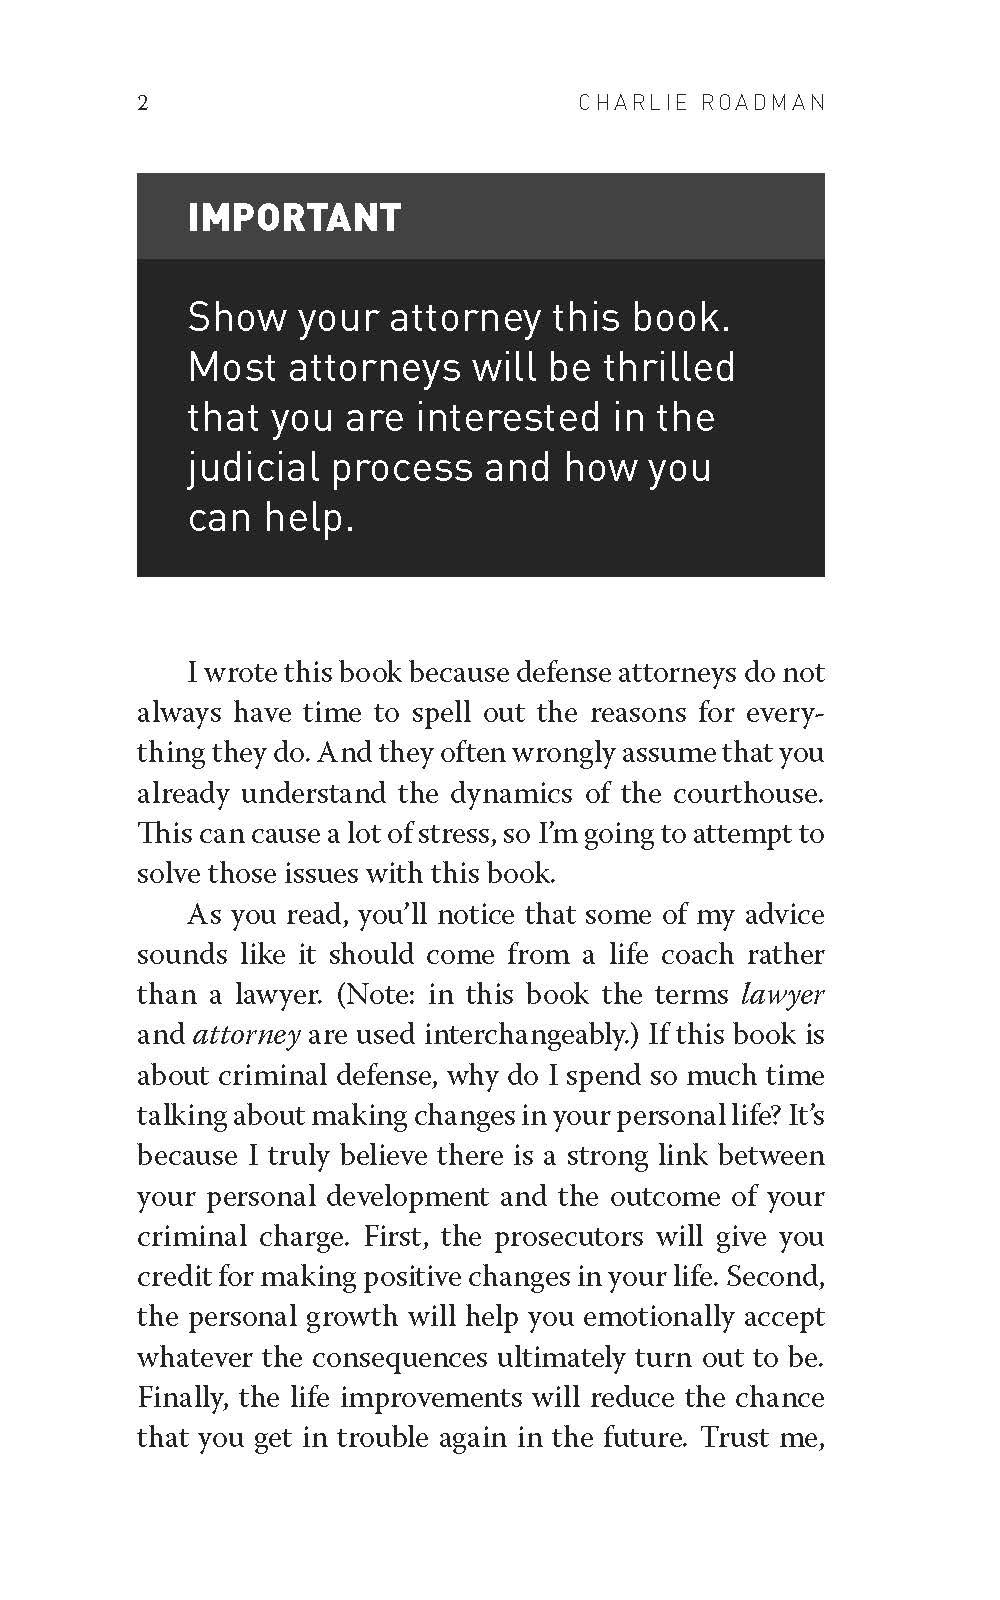 Sample_of_Defendant_s_Guide_to_Defense_Page_05.jpg